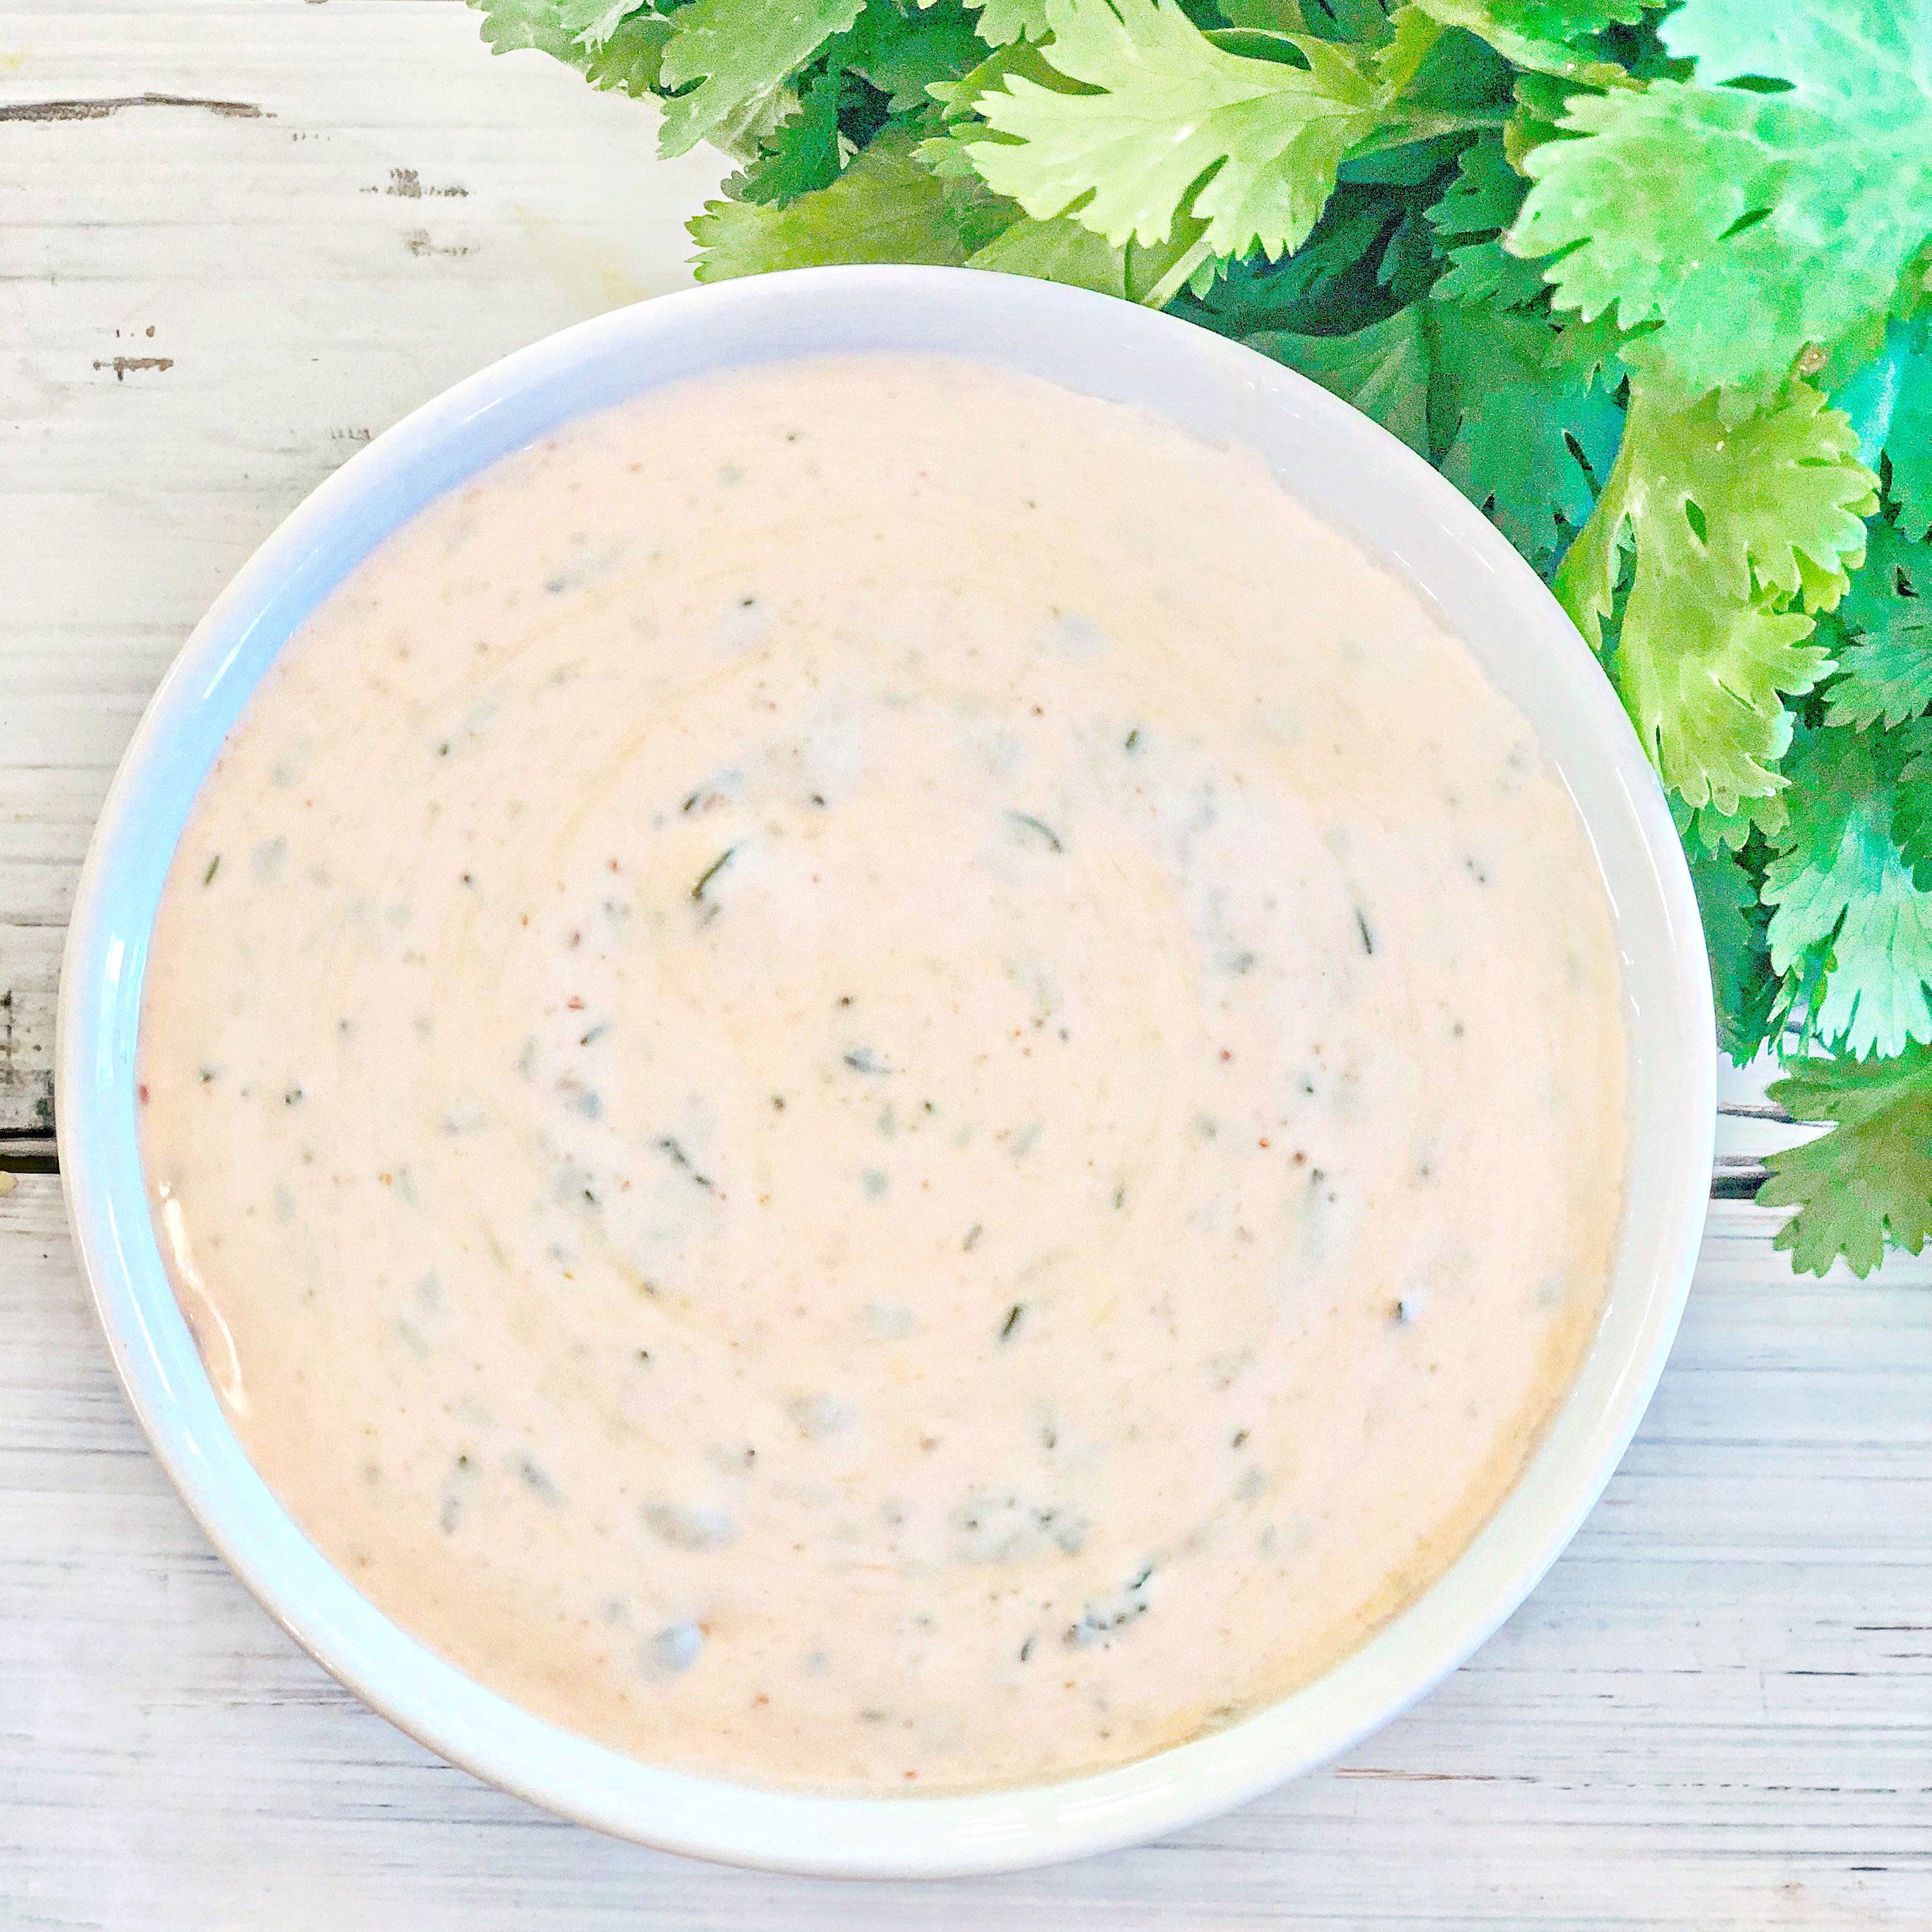 Only five simple ingredients and about 5 minutes are all you need.

This creamy and delicious dressing is perfect for drizzling over tacos, enchiladas, salads, burrito bowls, and even makes a great dip for chips, too. via @thiswifecooks